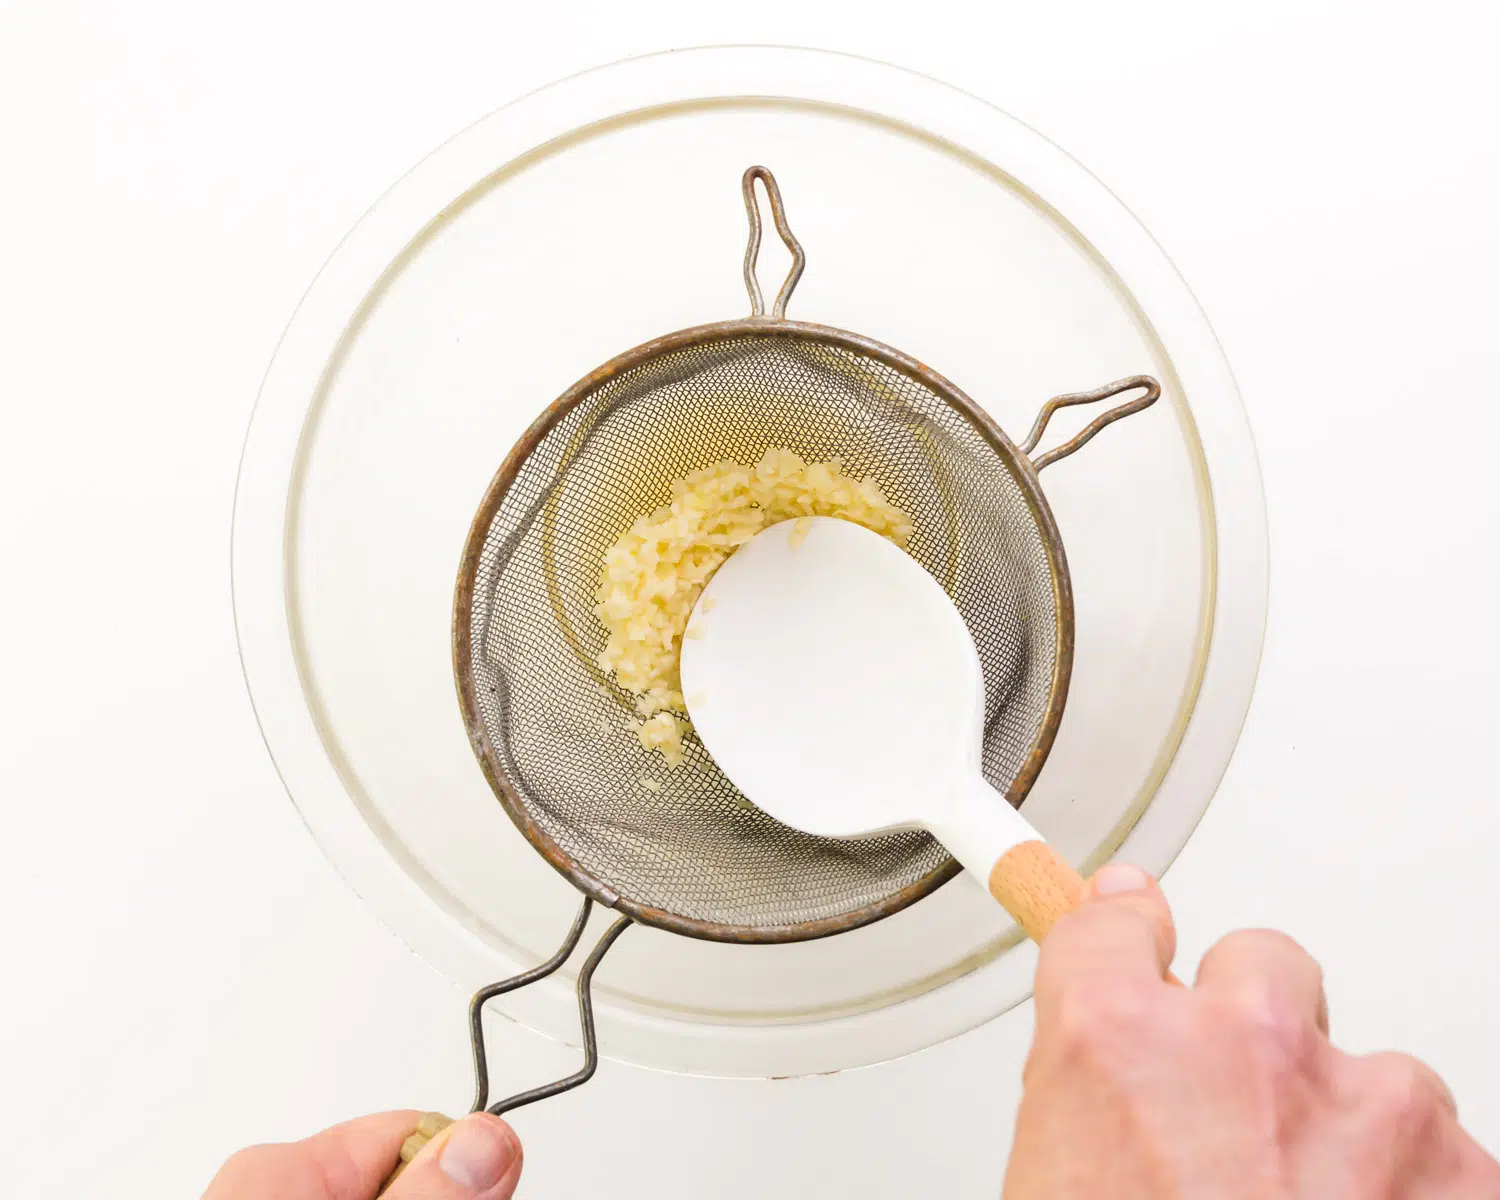 Garlic is being pressed with a spatula into a fine mesh strainer positioned over a glass bowl.